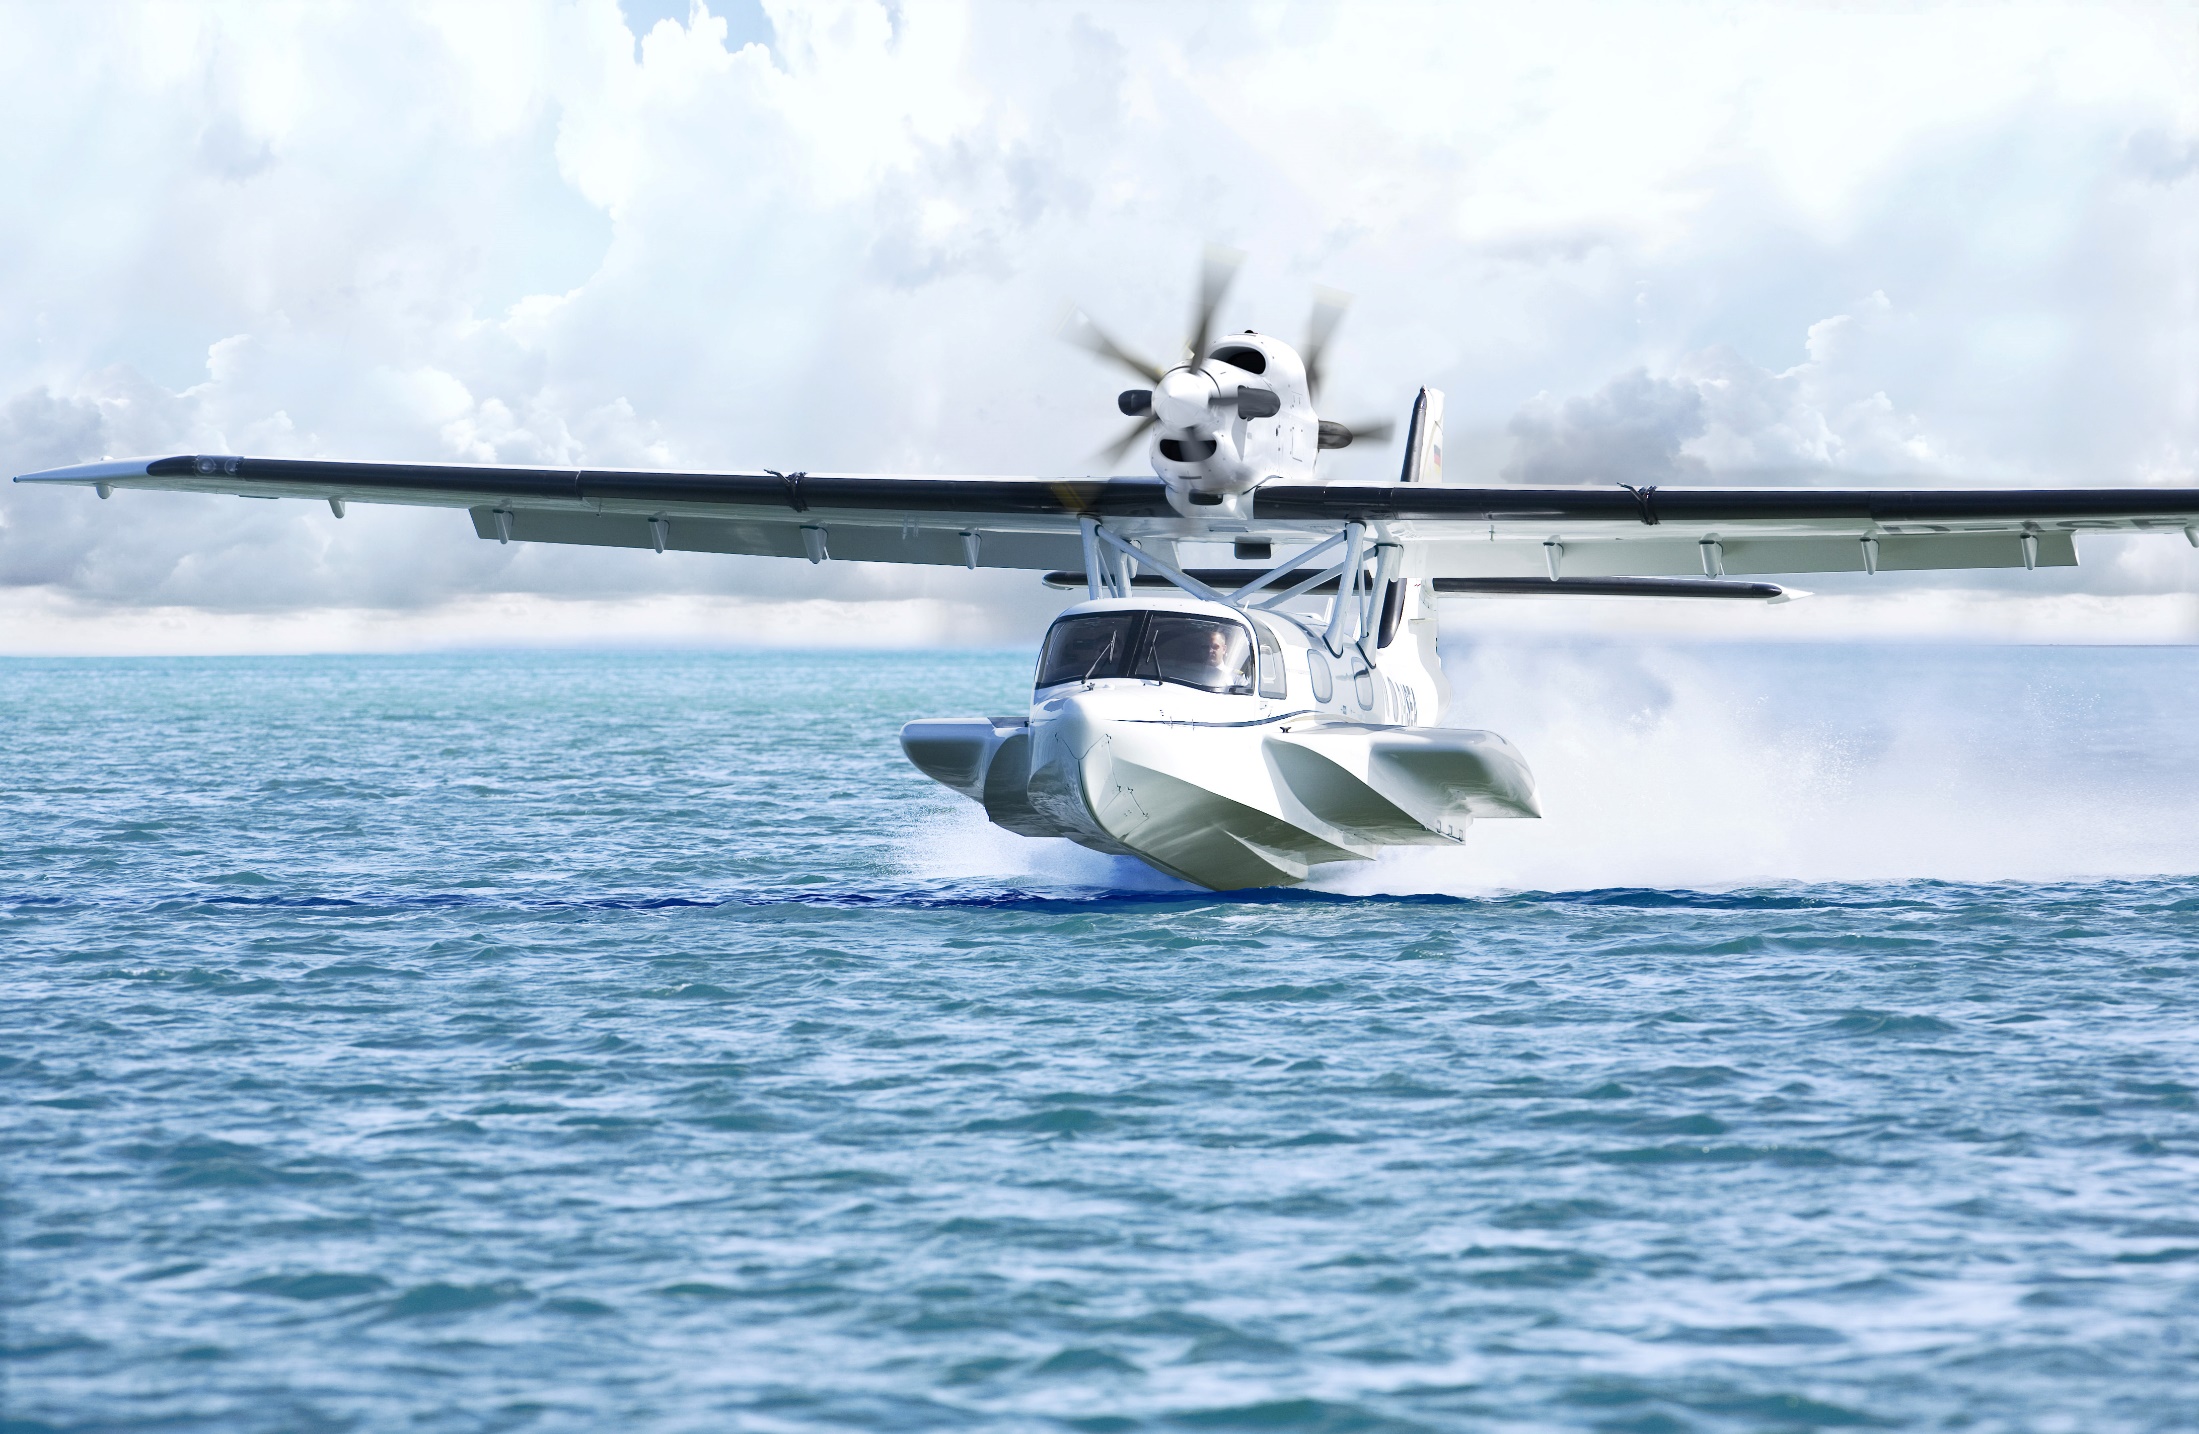 Dornier Seastar THE WORLD Ś MOST ADVANCED AMPHIBIOUS AIRCRAFT IS COMING SOON TO GRECE TO